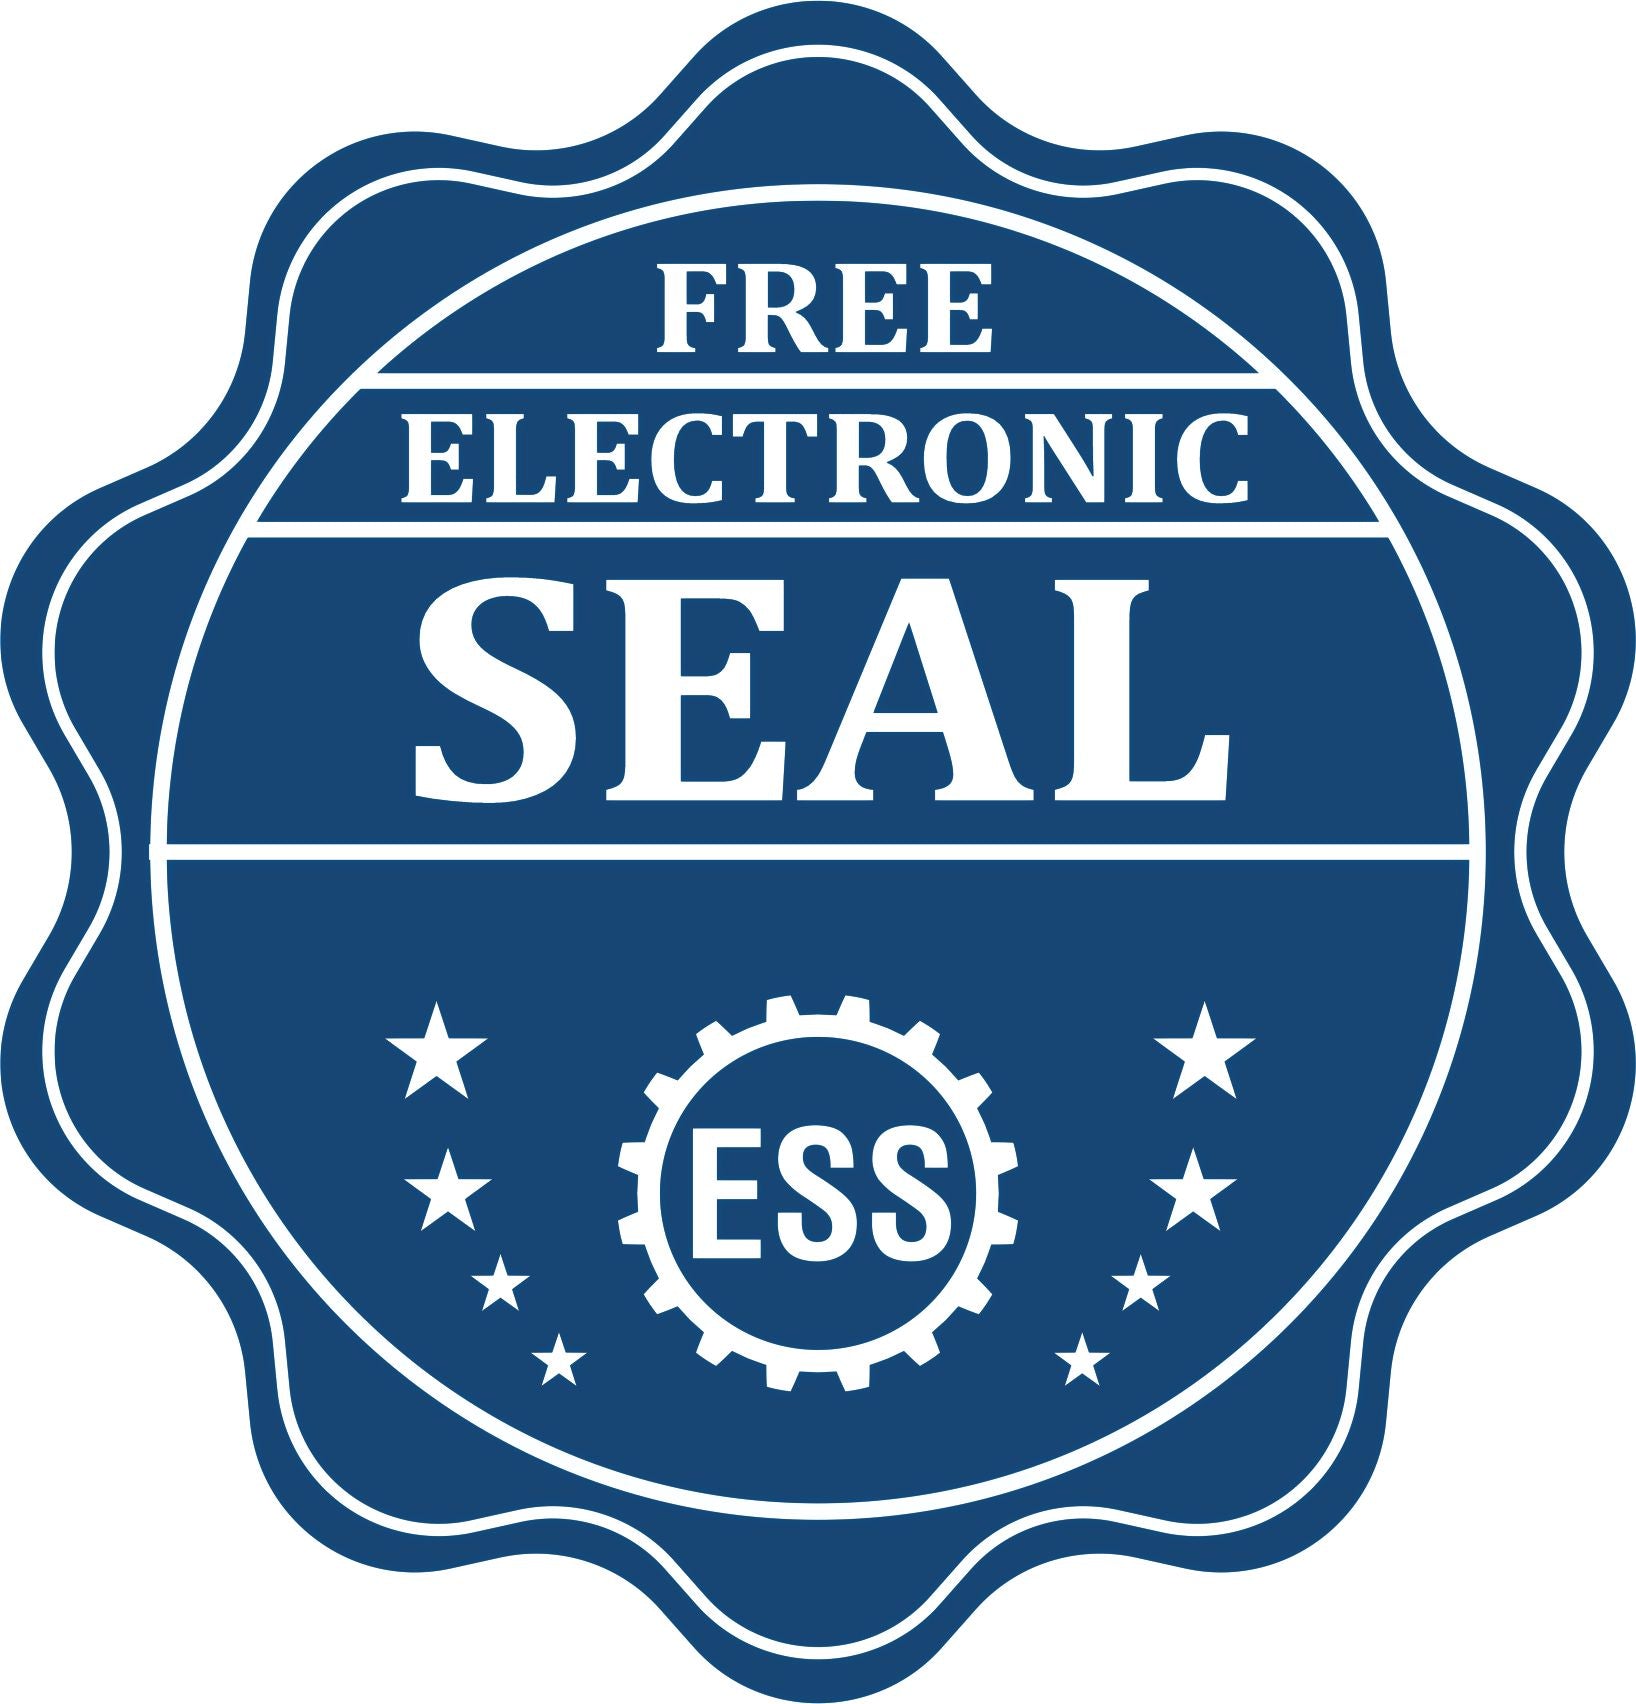 A badge showing a free electronic seal for the Long Reach Montana Land Surveyor Seal with stars and the ESS gear on the emblem.